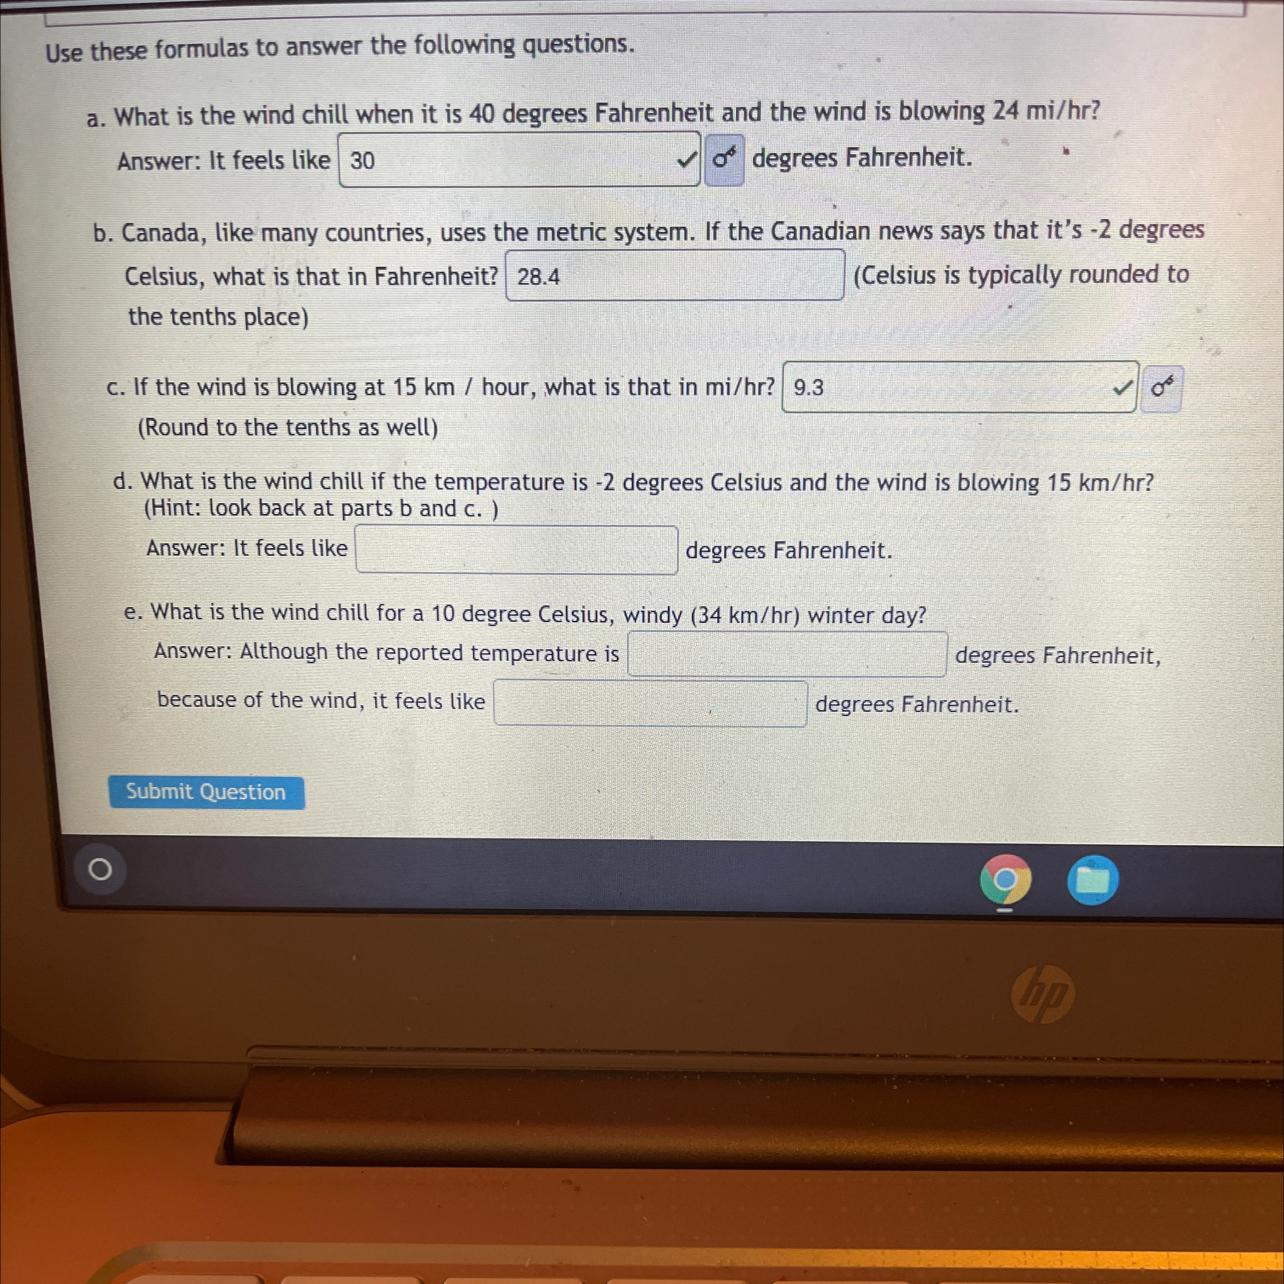 Can You Please Help Me With This Question D And E